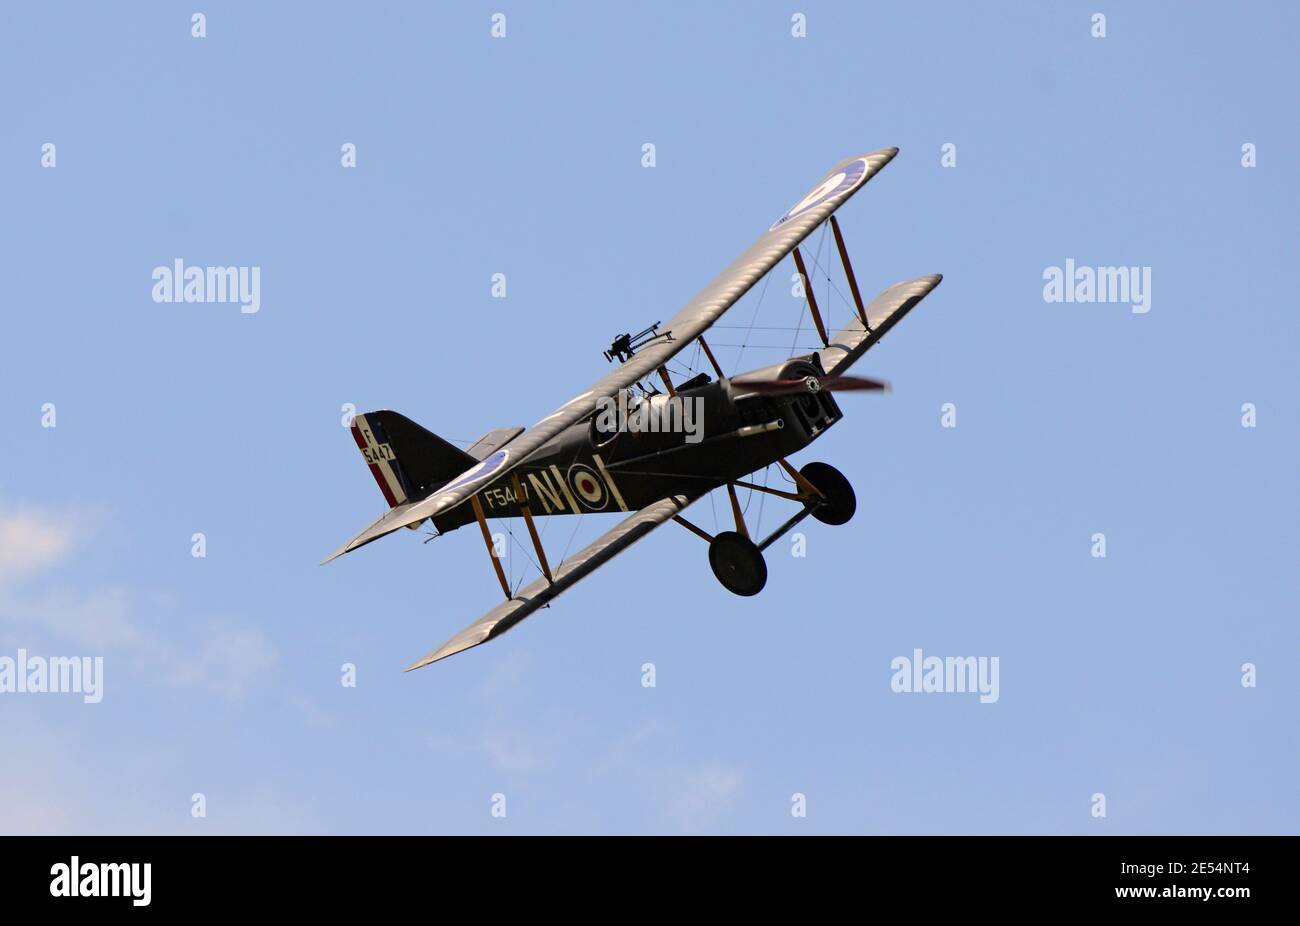 SCOTLAND Montrose -- 03 Aug 2014 -- Dr Neil Geddes in his replica SE5a biplane, used by the Royal Flying Corps in World War I as he performed an air d Stock Photo